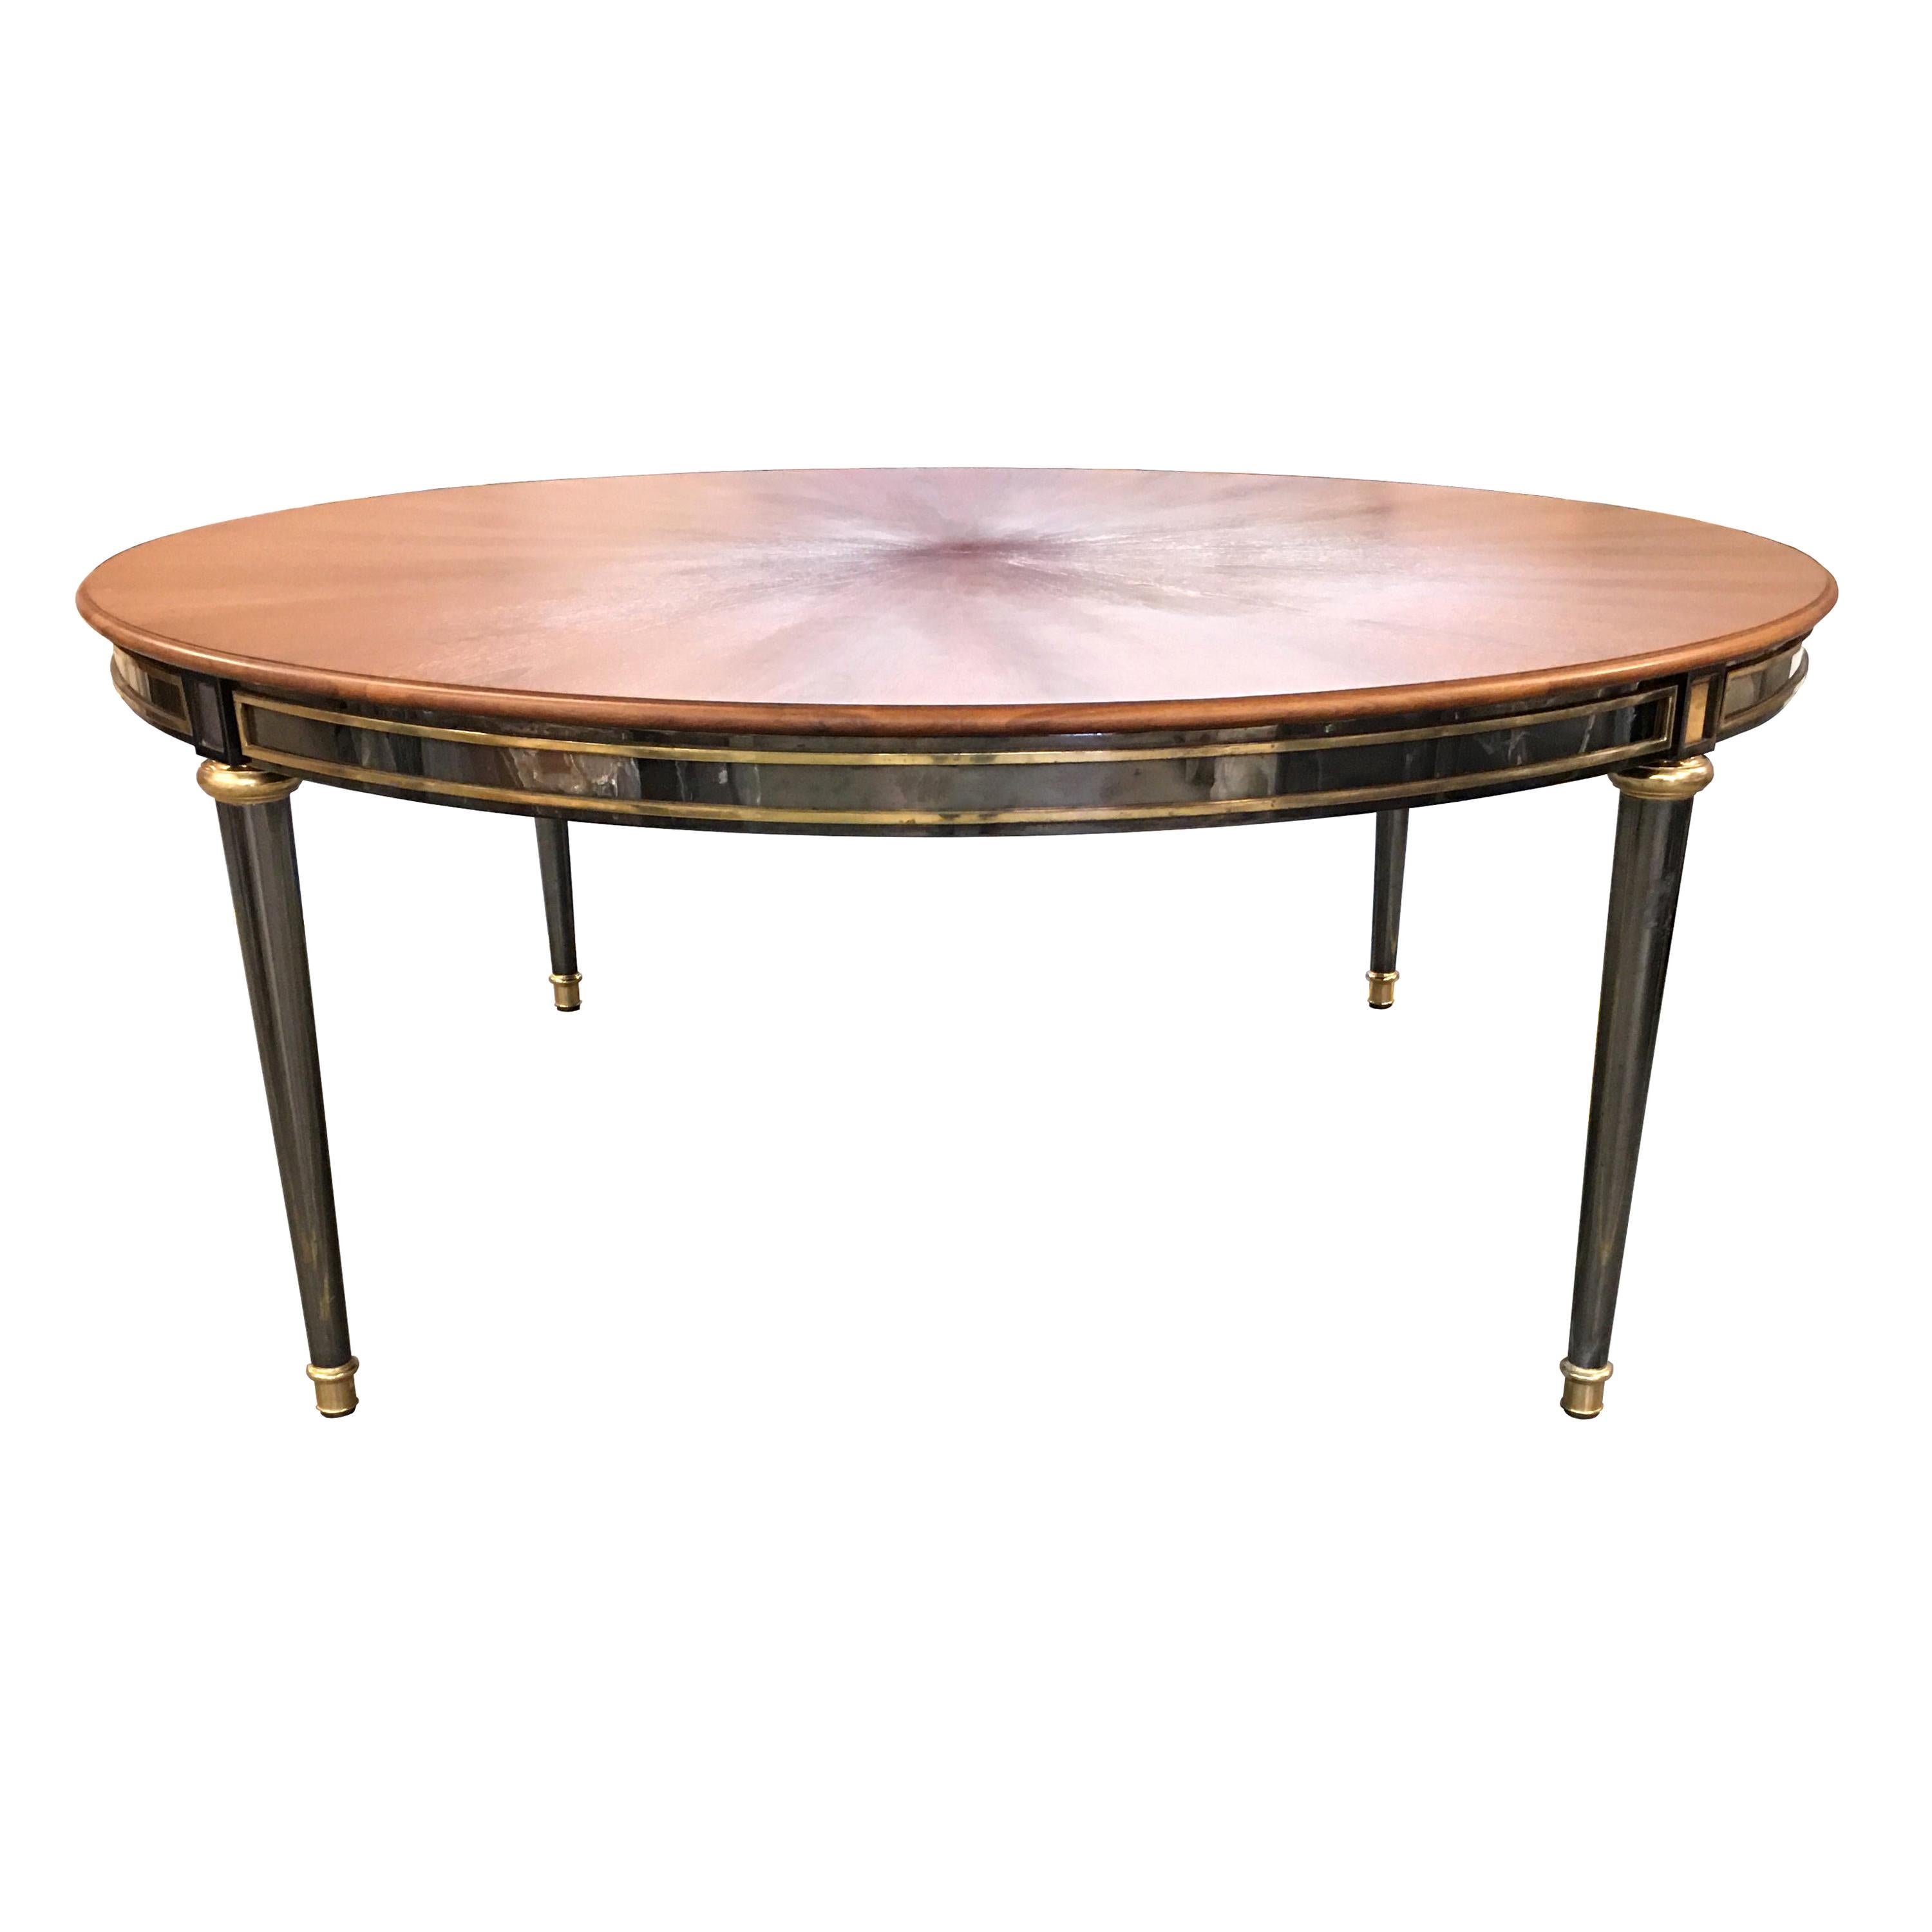 Gunmetal and Brass Dining Table in the Style of Maison Jansen